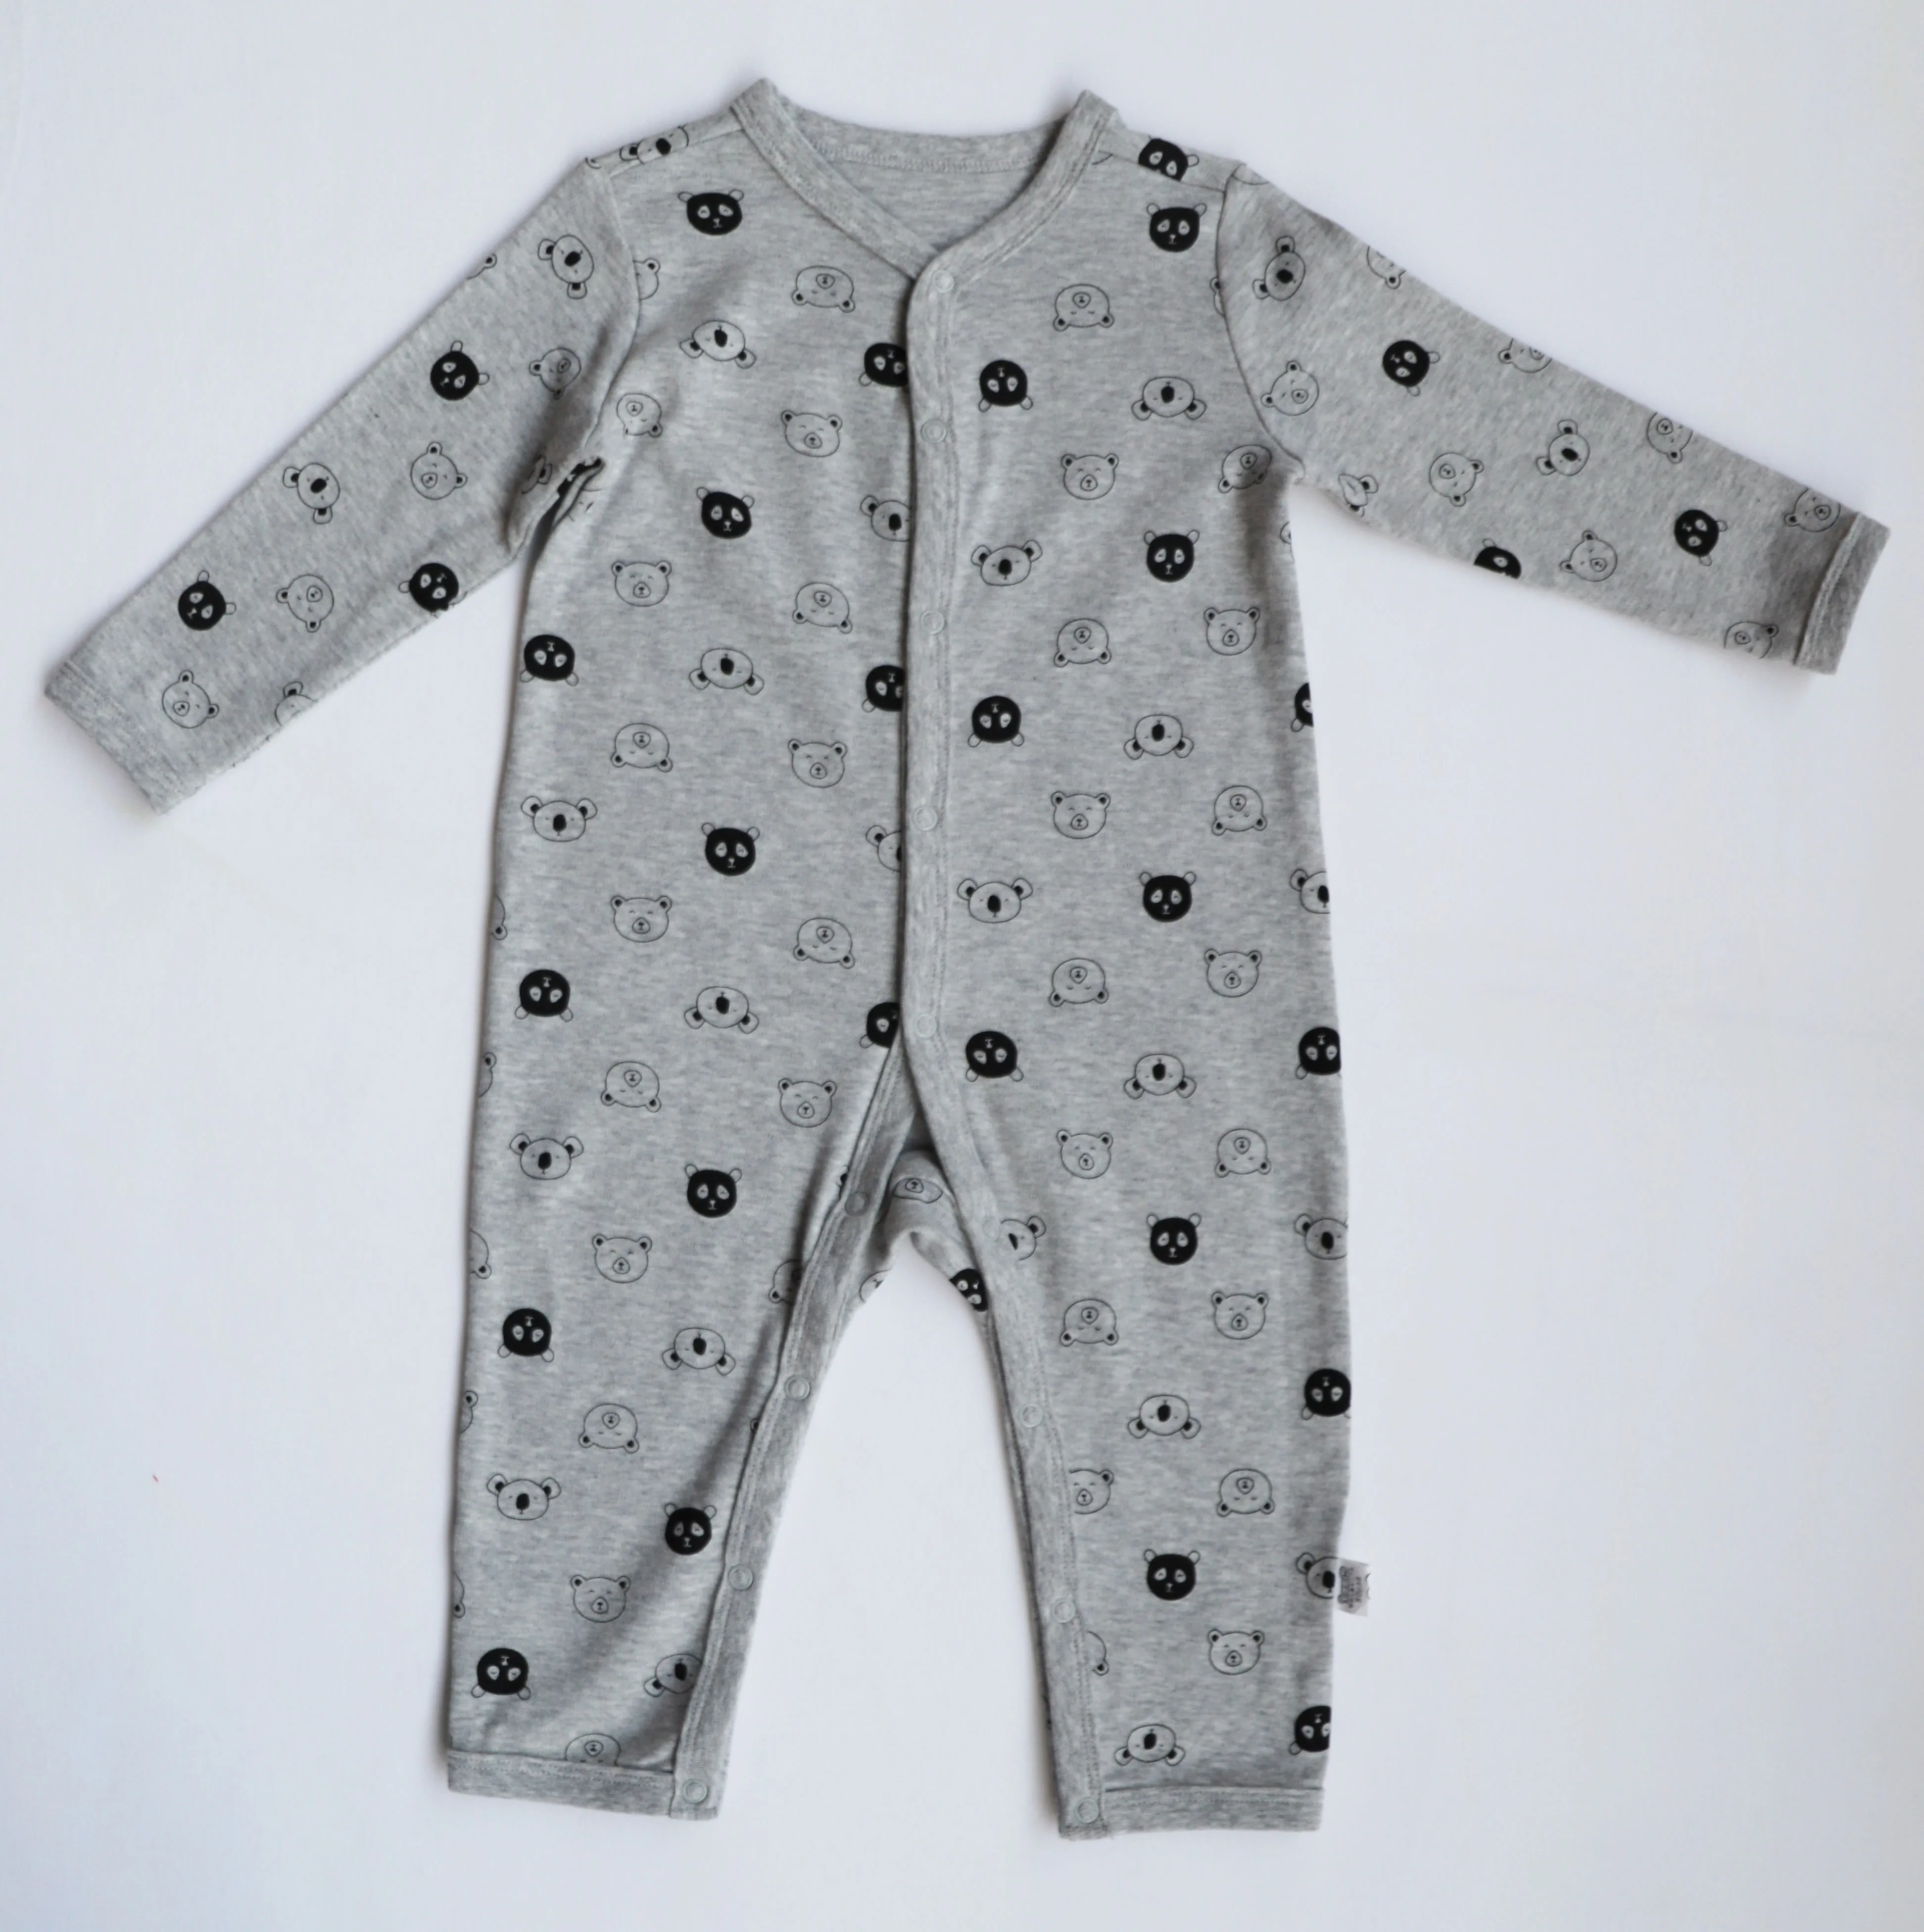 
Comfortable Cotton Winter Toddler Boutique Long Sleeve Clothes Baby Romper Onsie 